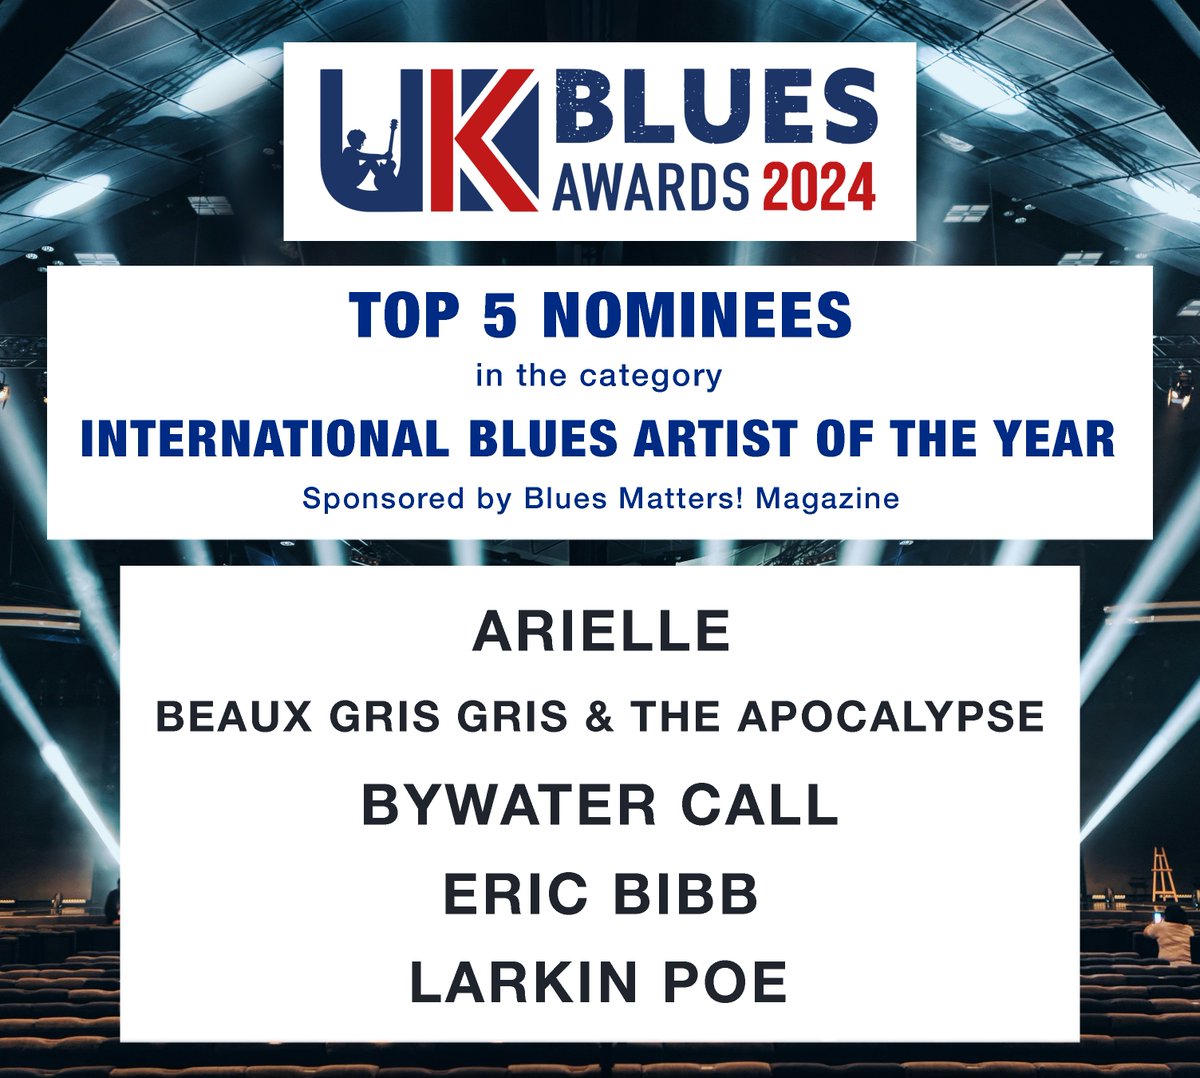 Congratulations to the Finalists of the International Blues Artist of the Year! The winner will be announced at the Awards ceremony 25th April! Good luck to all. @Arielleofficial @BeauxGrisGris @bywatercall @EricBibb @LarkinPoe @BluesMattersMag